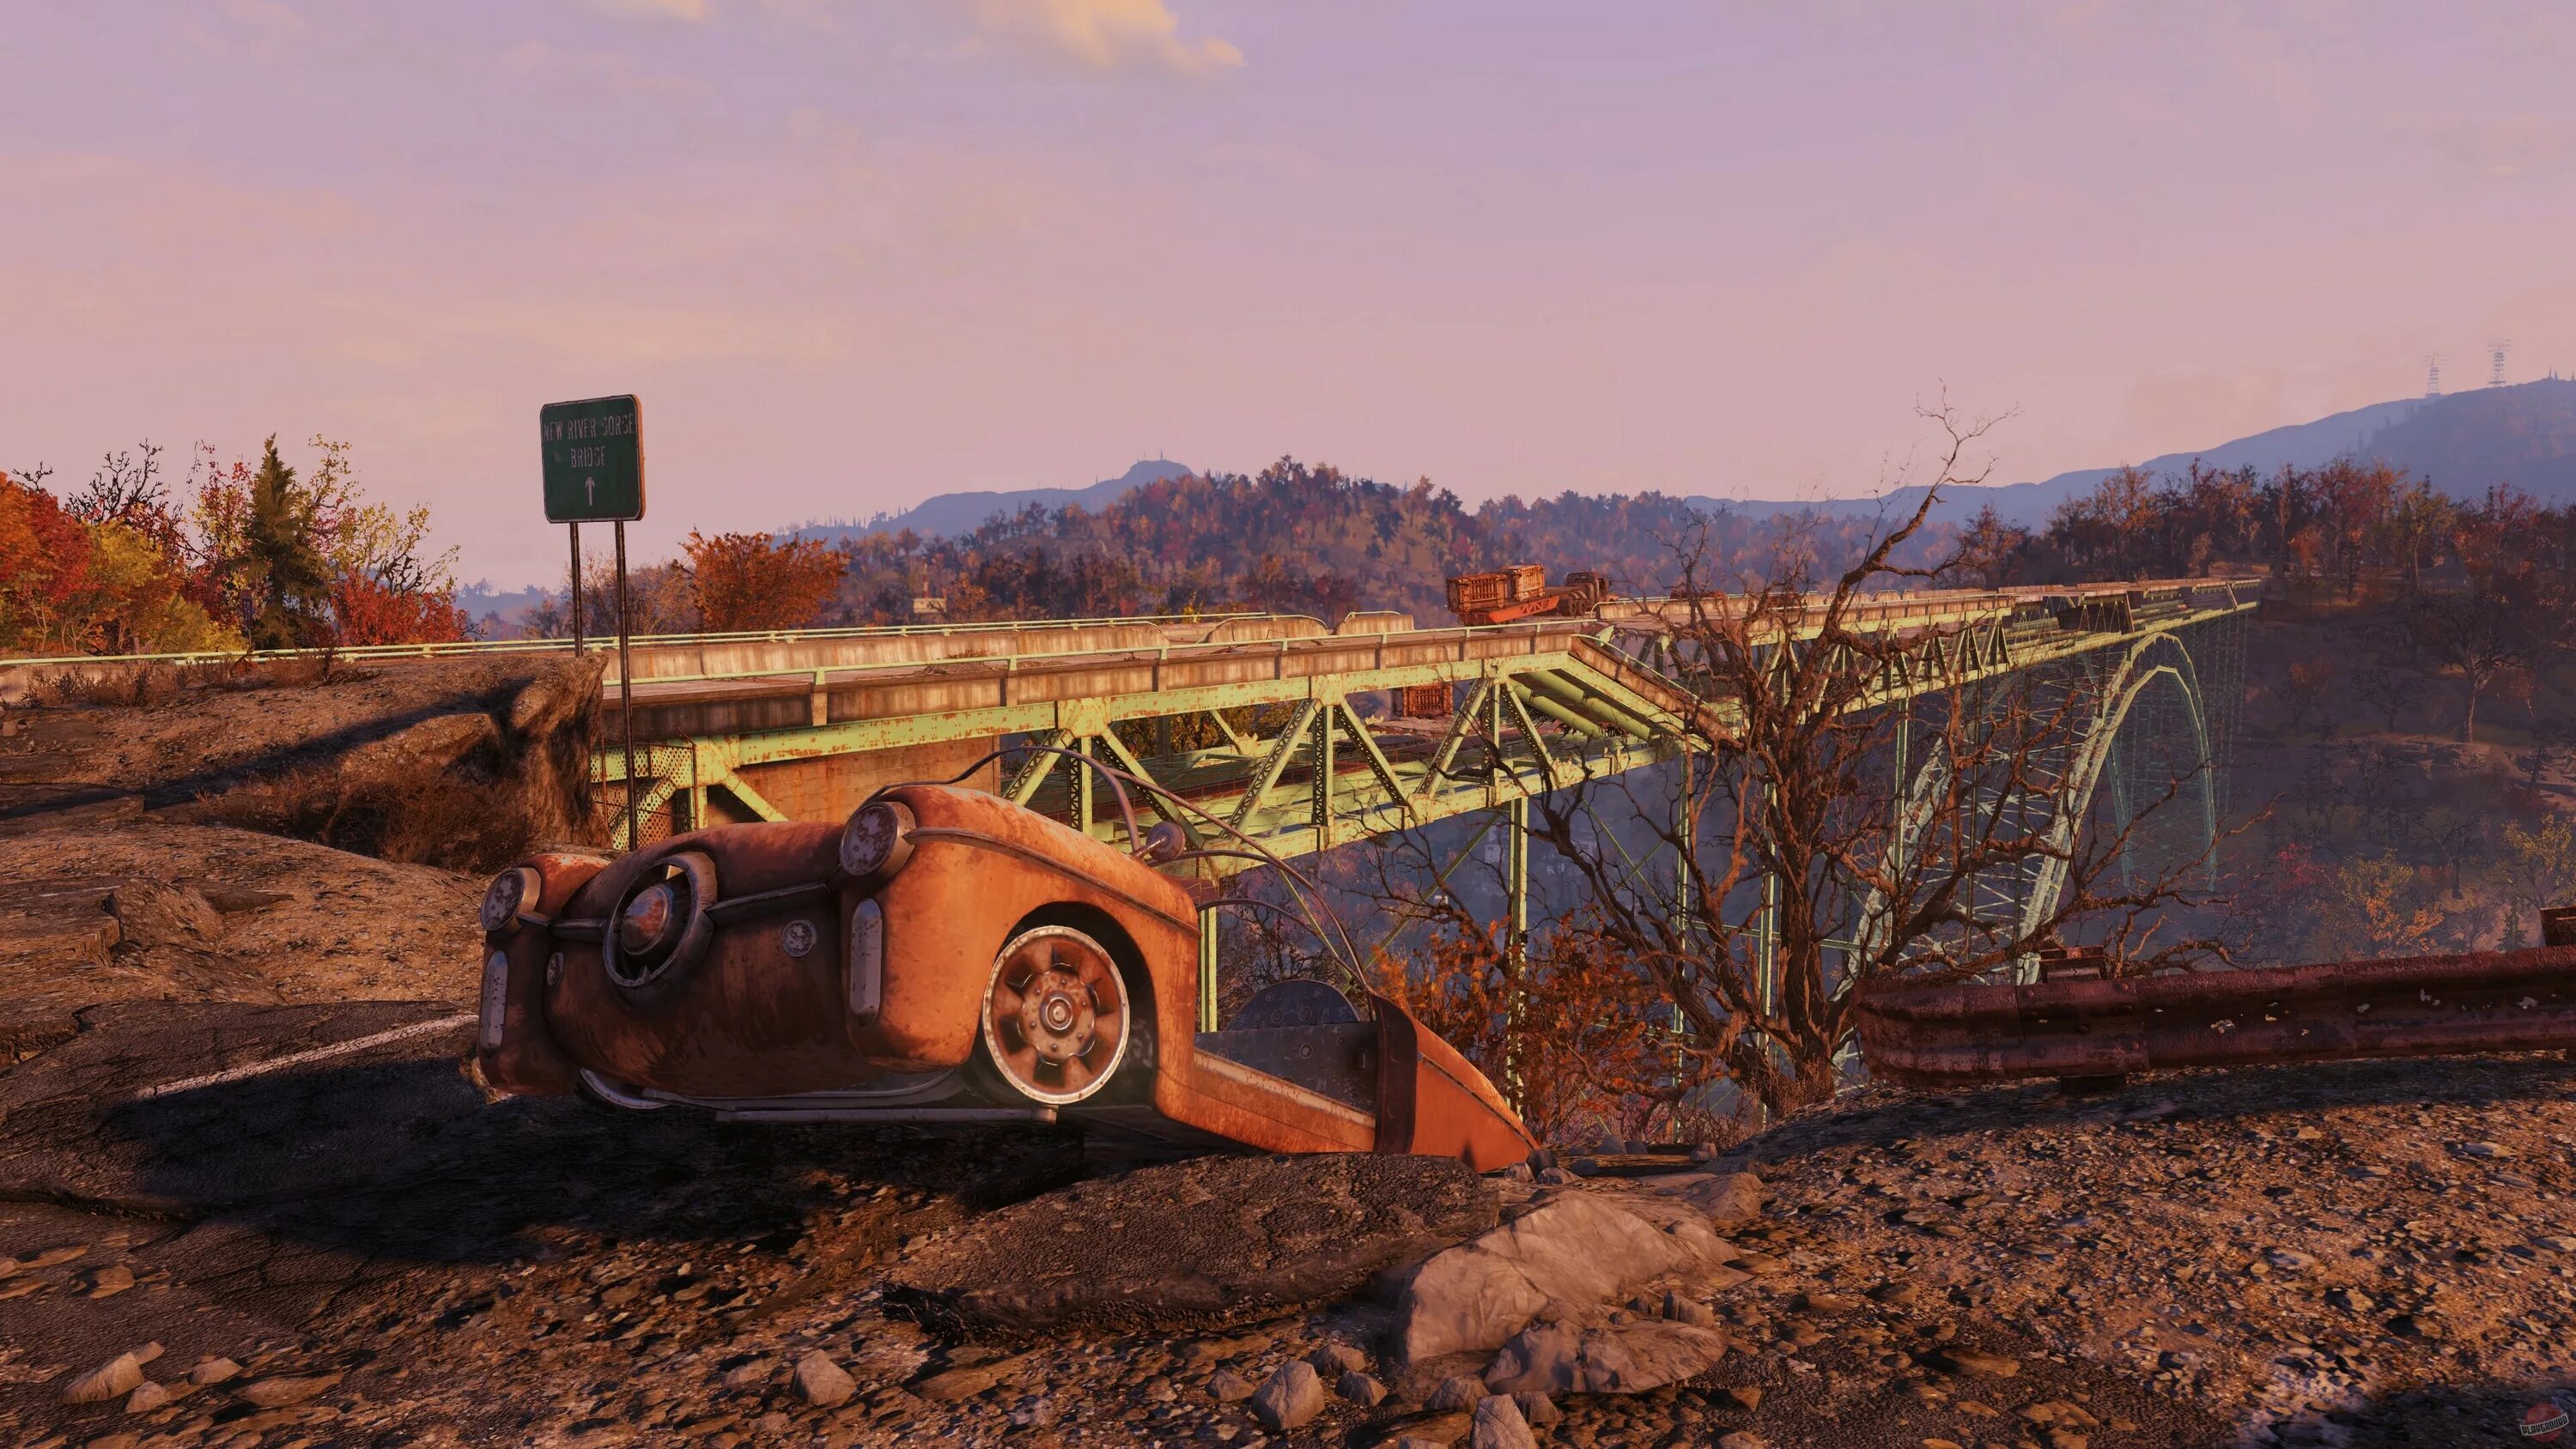 Купить фоллаут 76. Fallout 76 Скриншоты. Fallout 76 Wastelanders. Fallout 76 Deluxe Edition ps4. Fallout 76 screenshots.